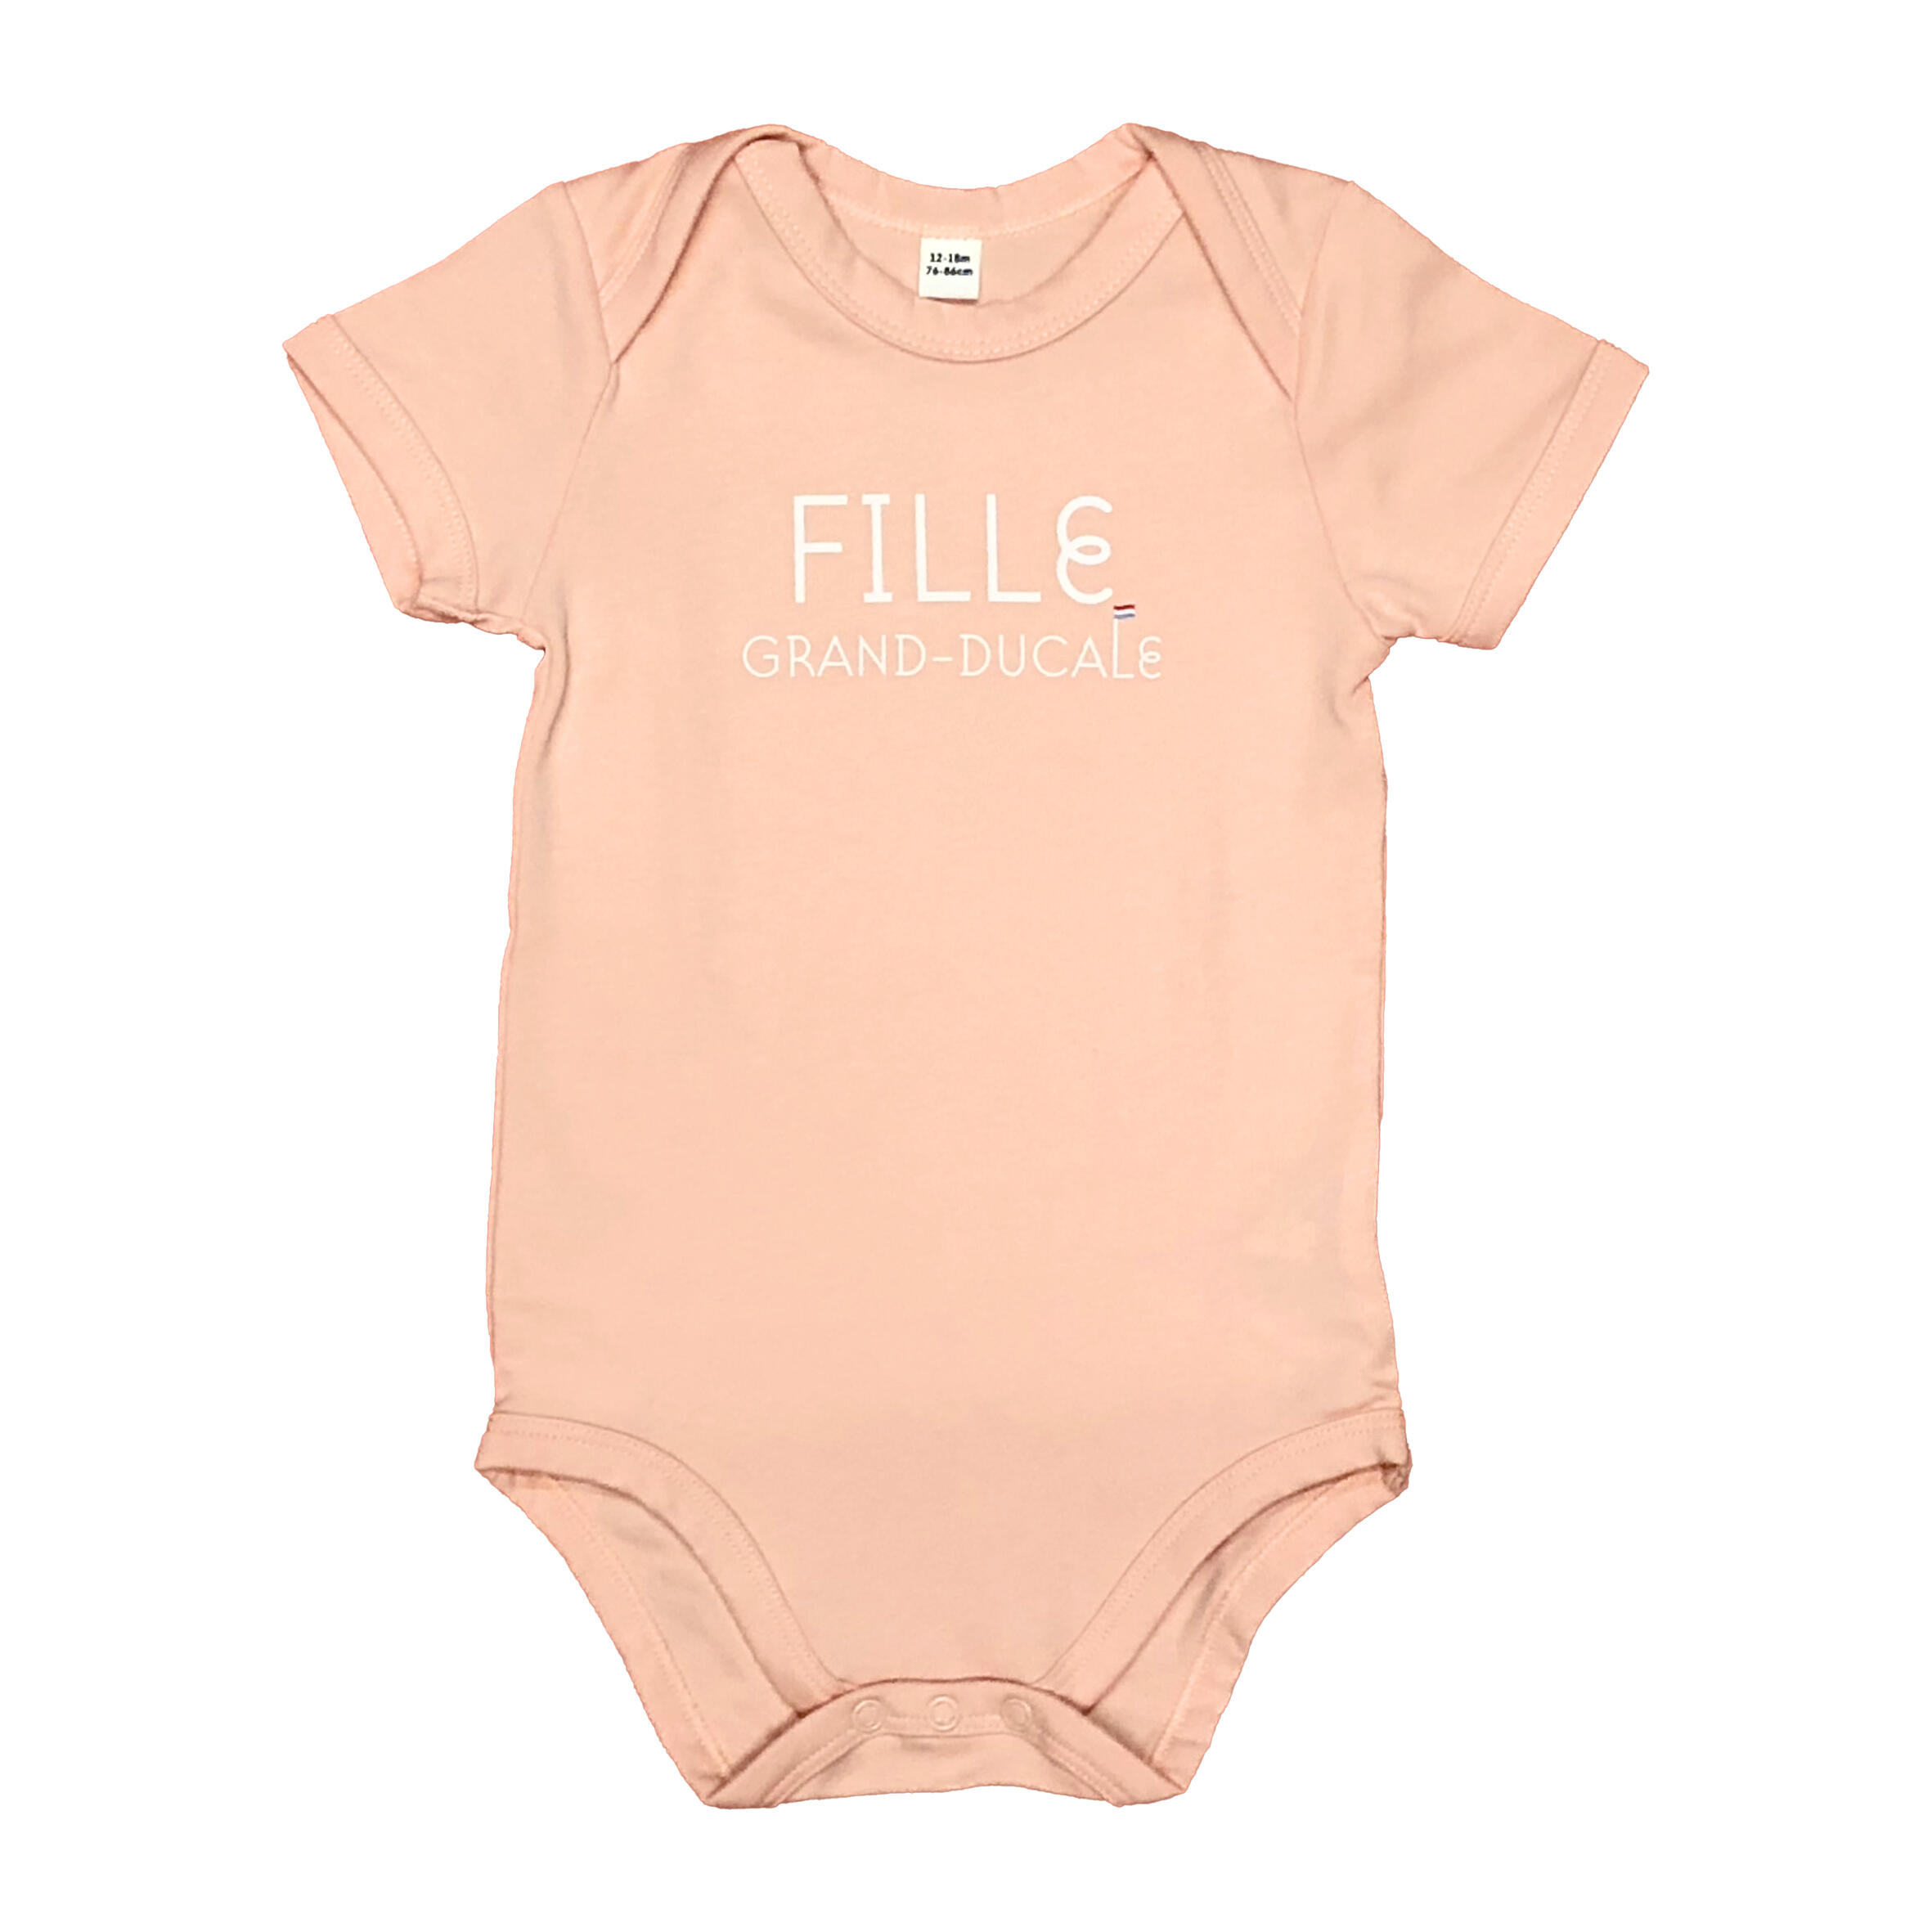 BODY KIDS FILLE GRAND DUCALE BABY PINK